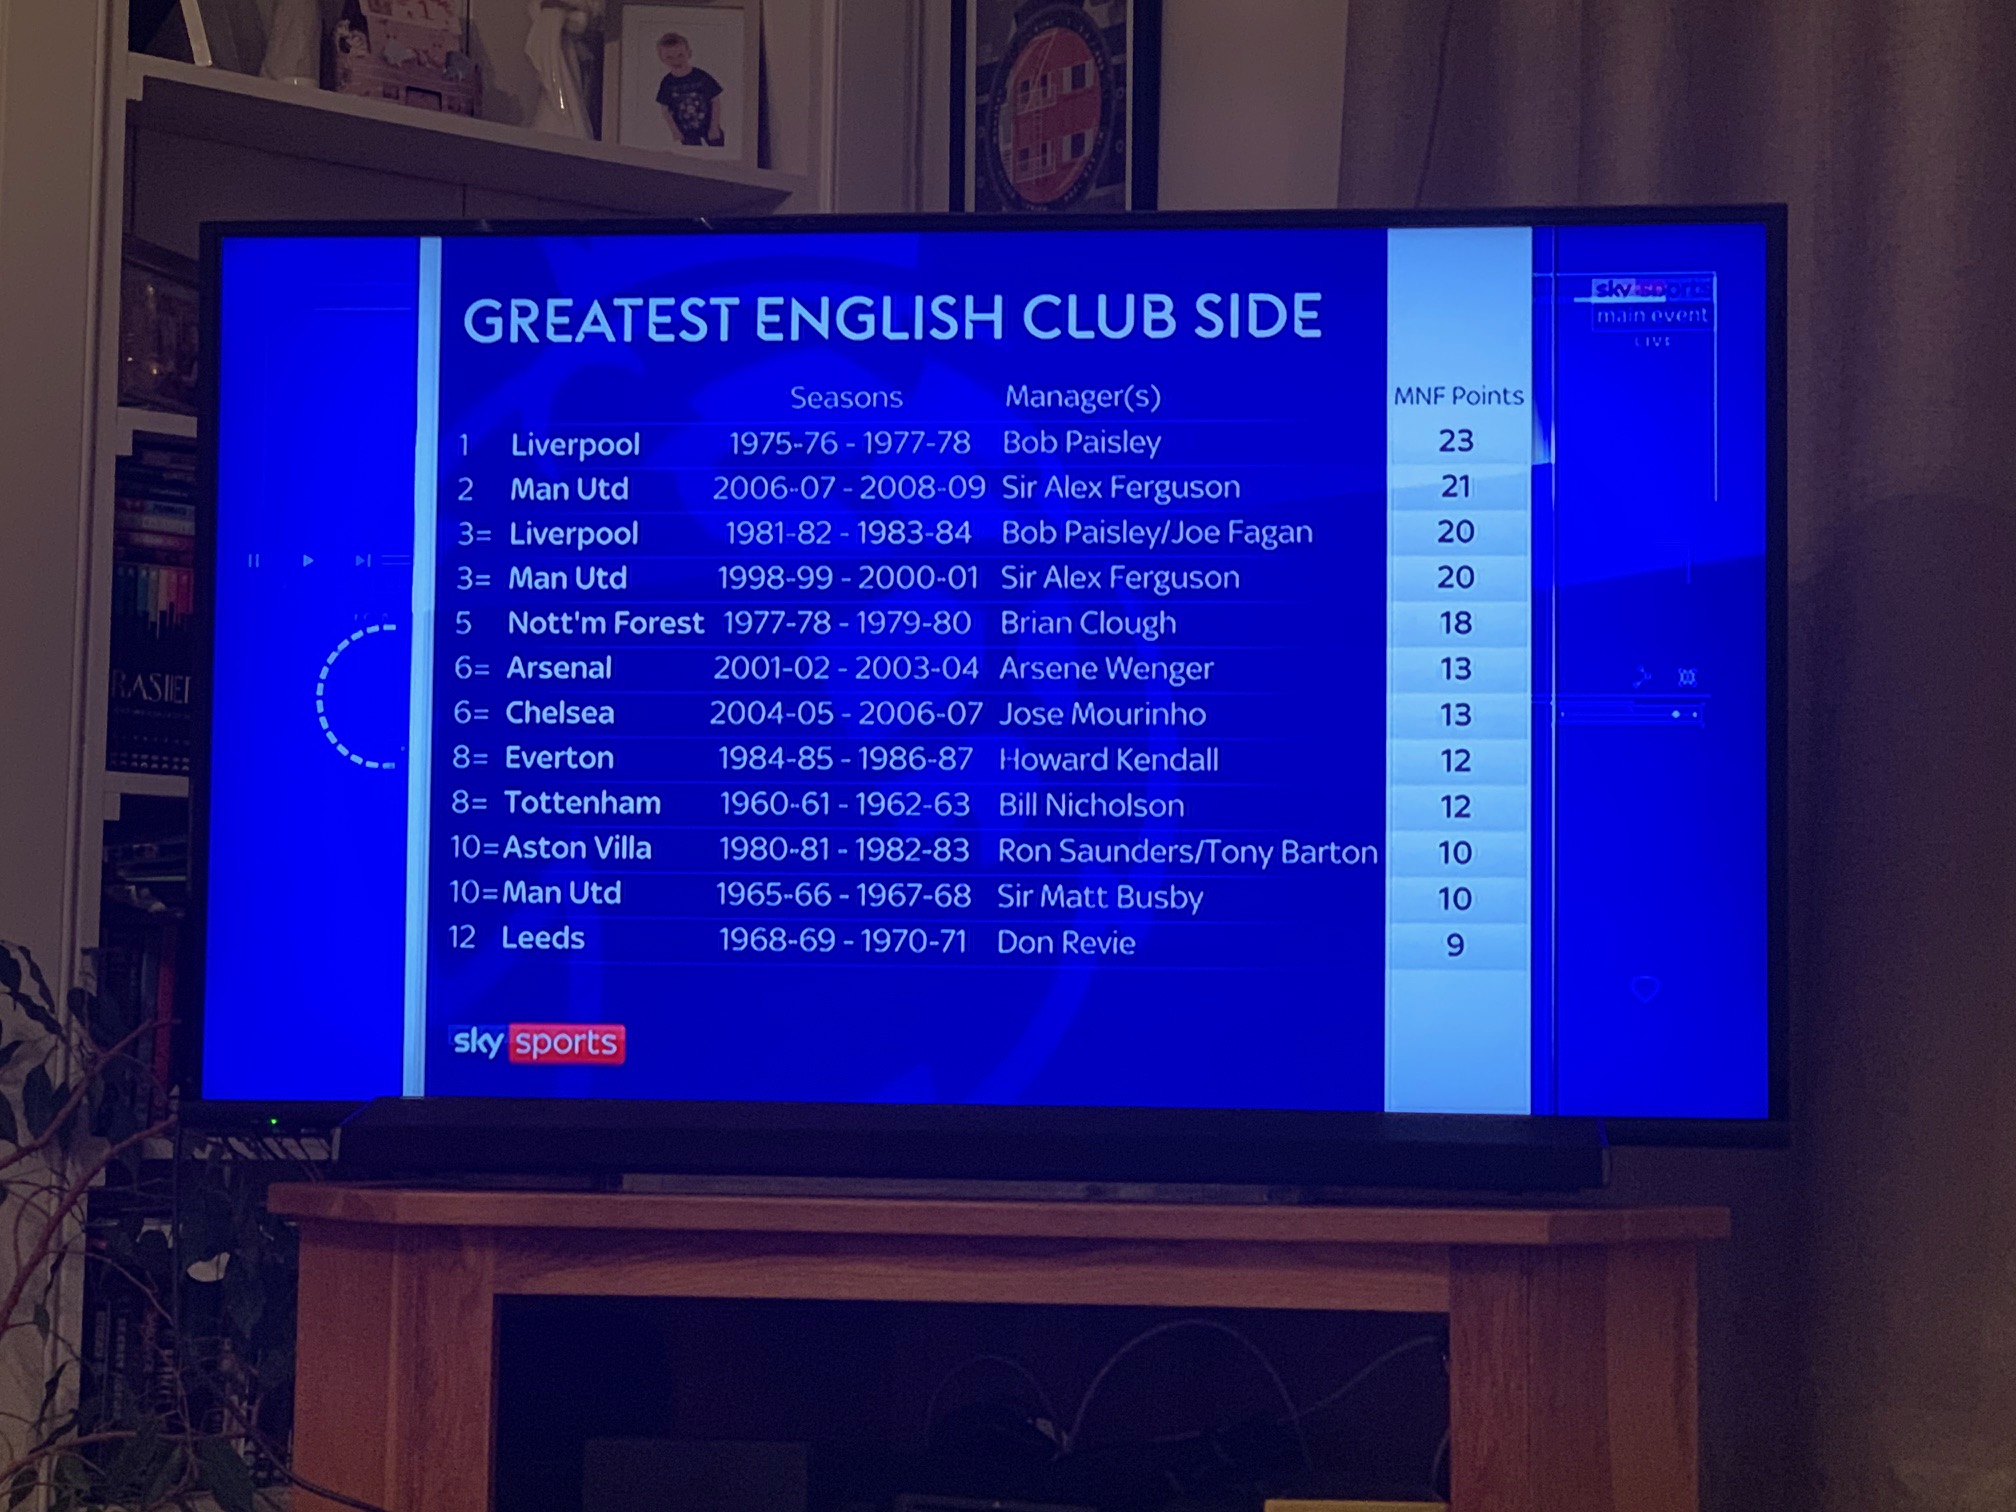 euro cups and league wins get the highest scores